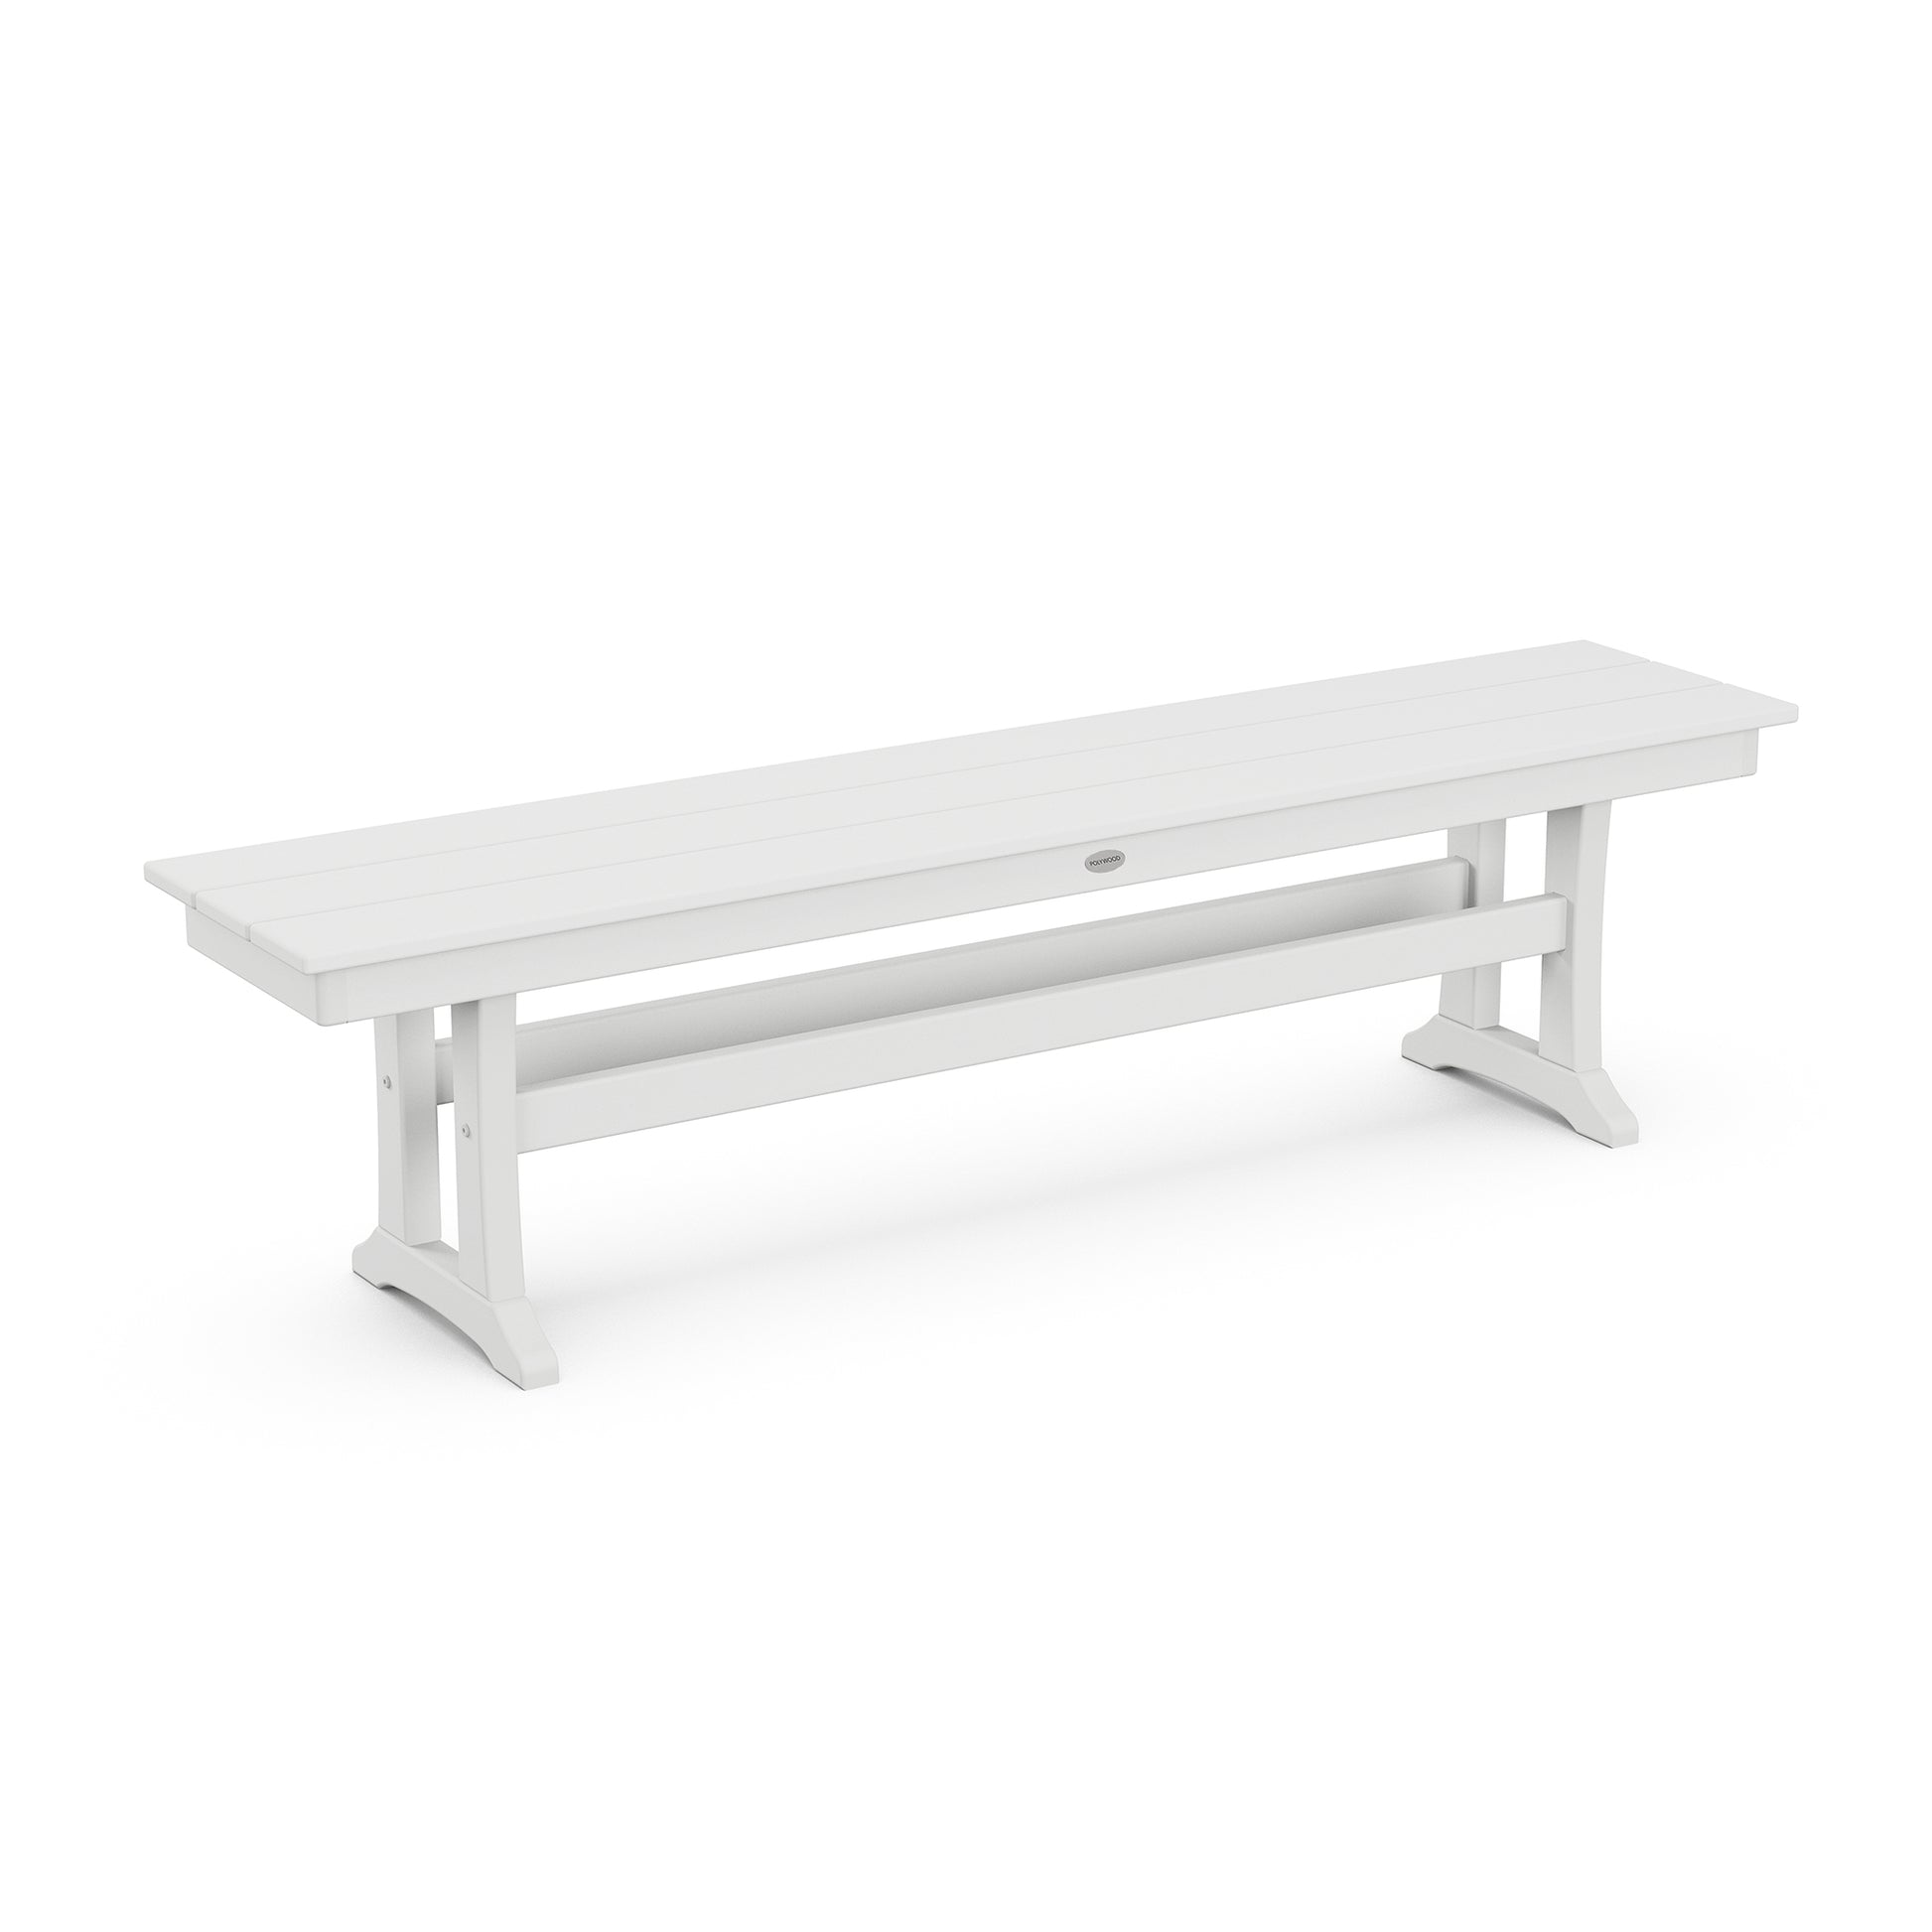 White POLYWOOD Farmhouse Trestle 65" Bench outdoor bench with a simple, classic design, featuring slatted seat and backless structure, isolated on a white background.